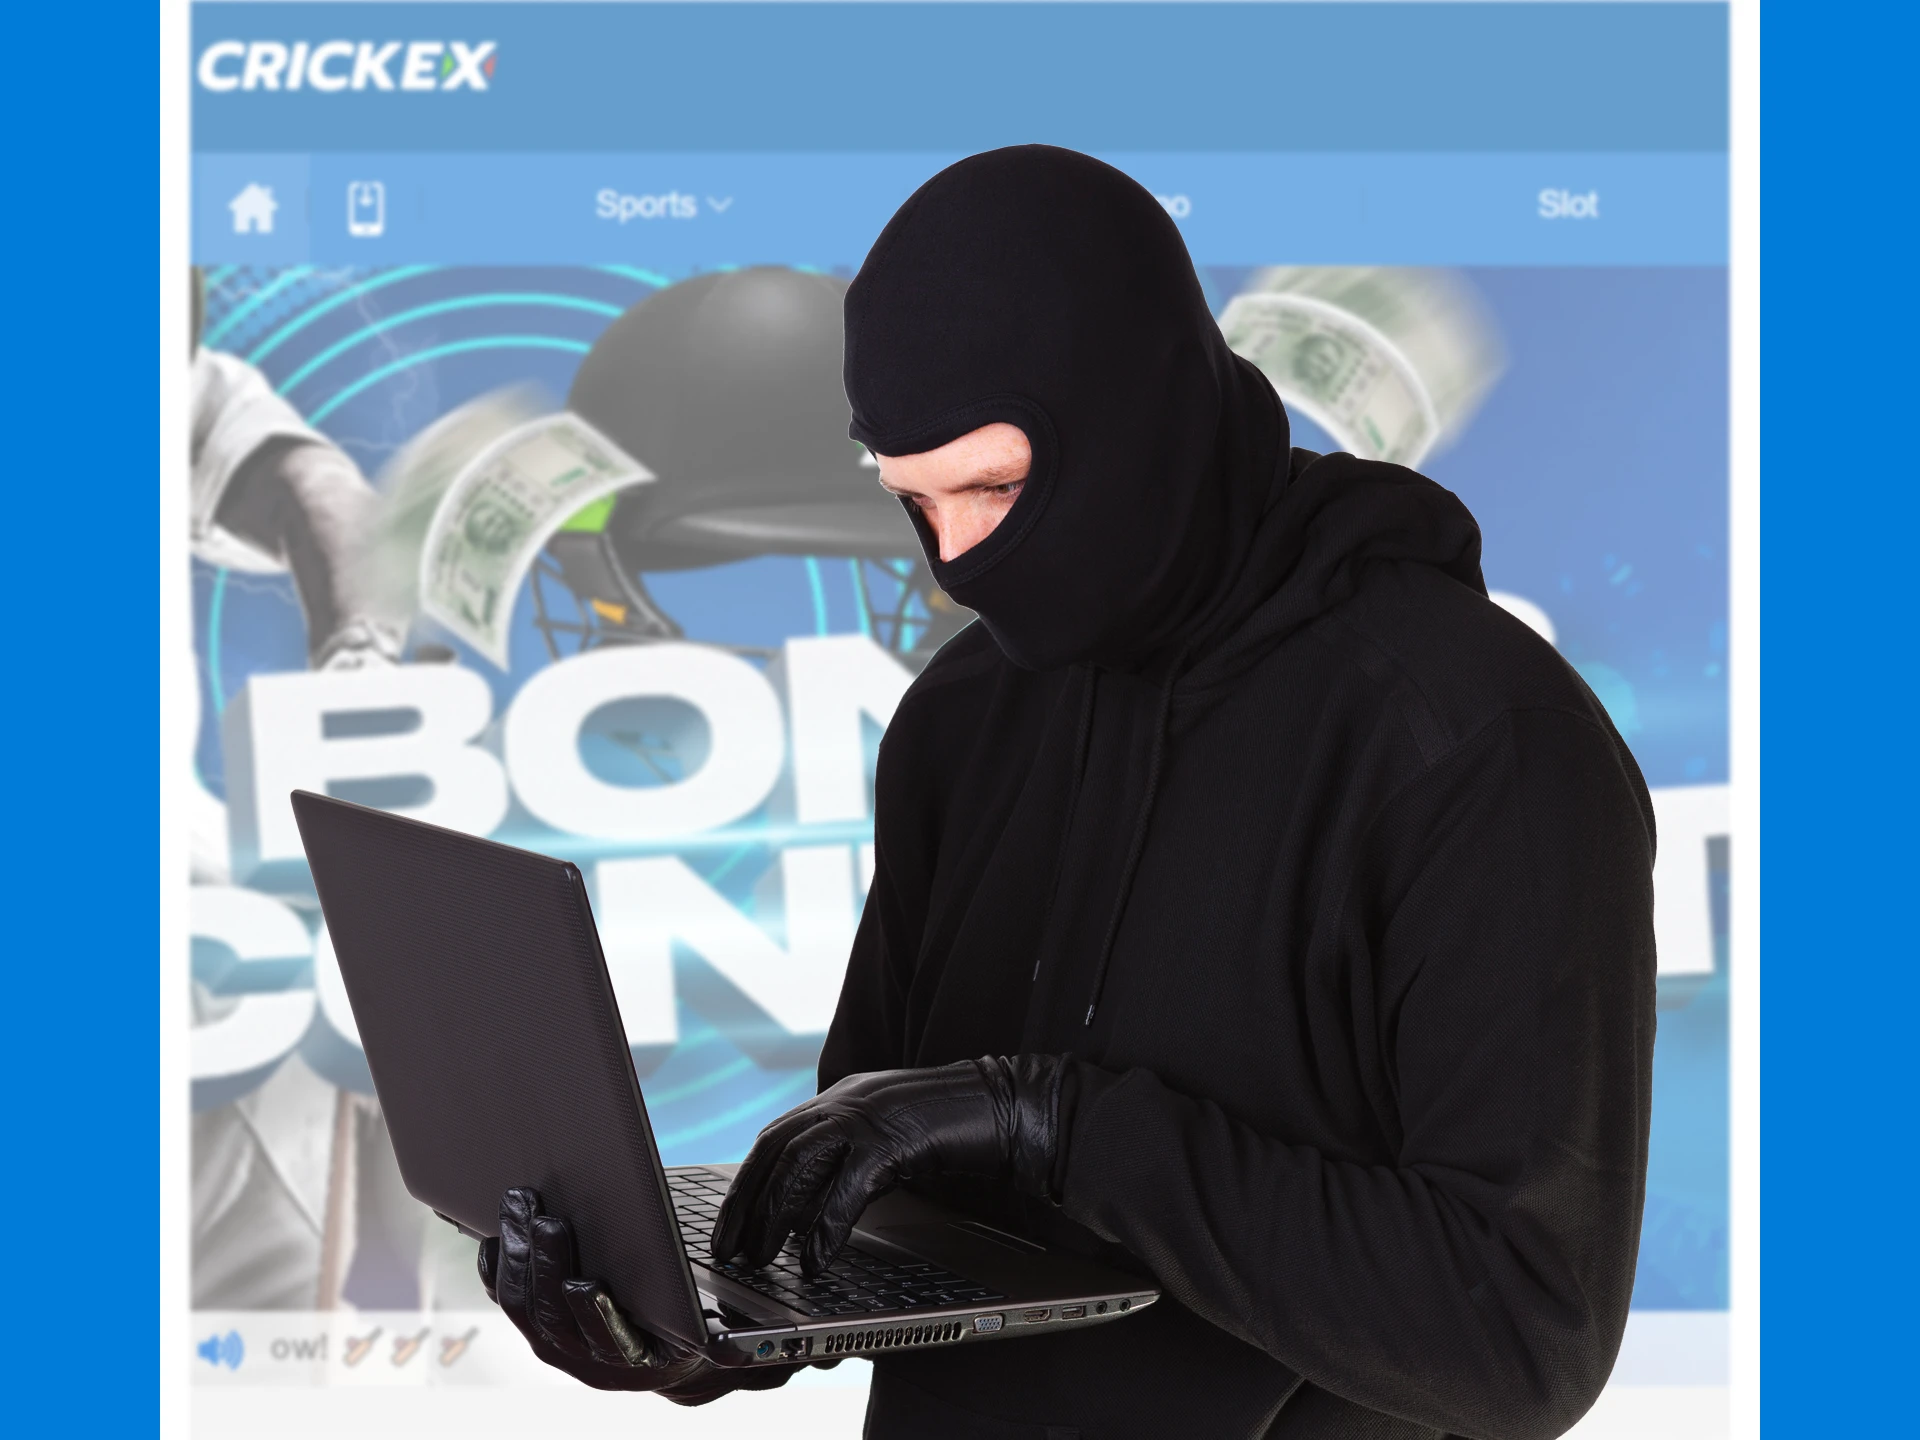 The Crickex service is protected from being hacked by scammers.